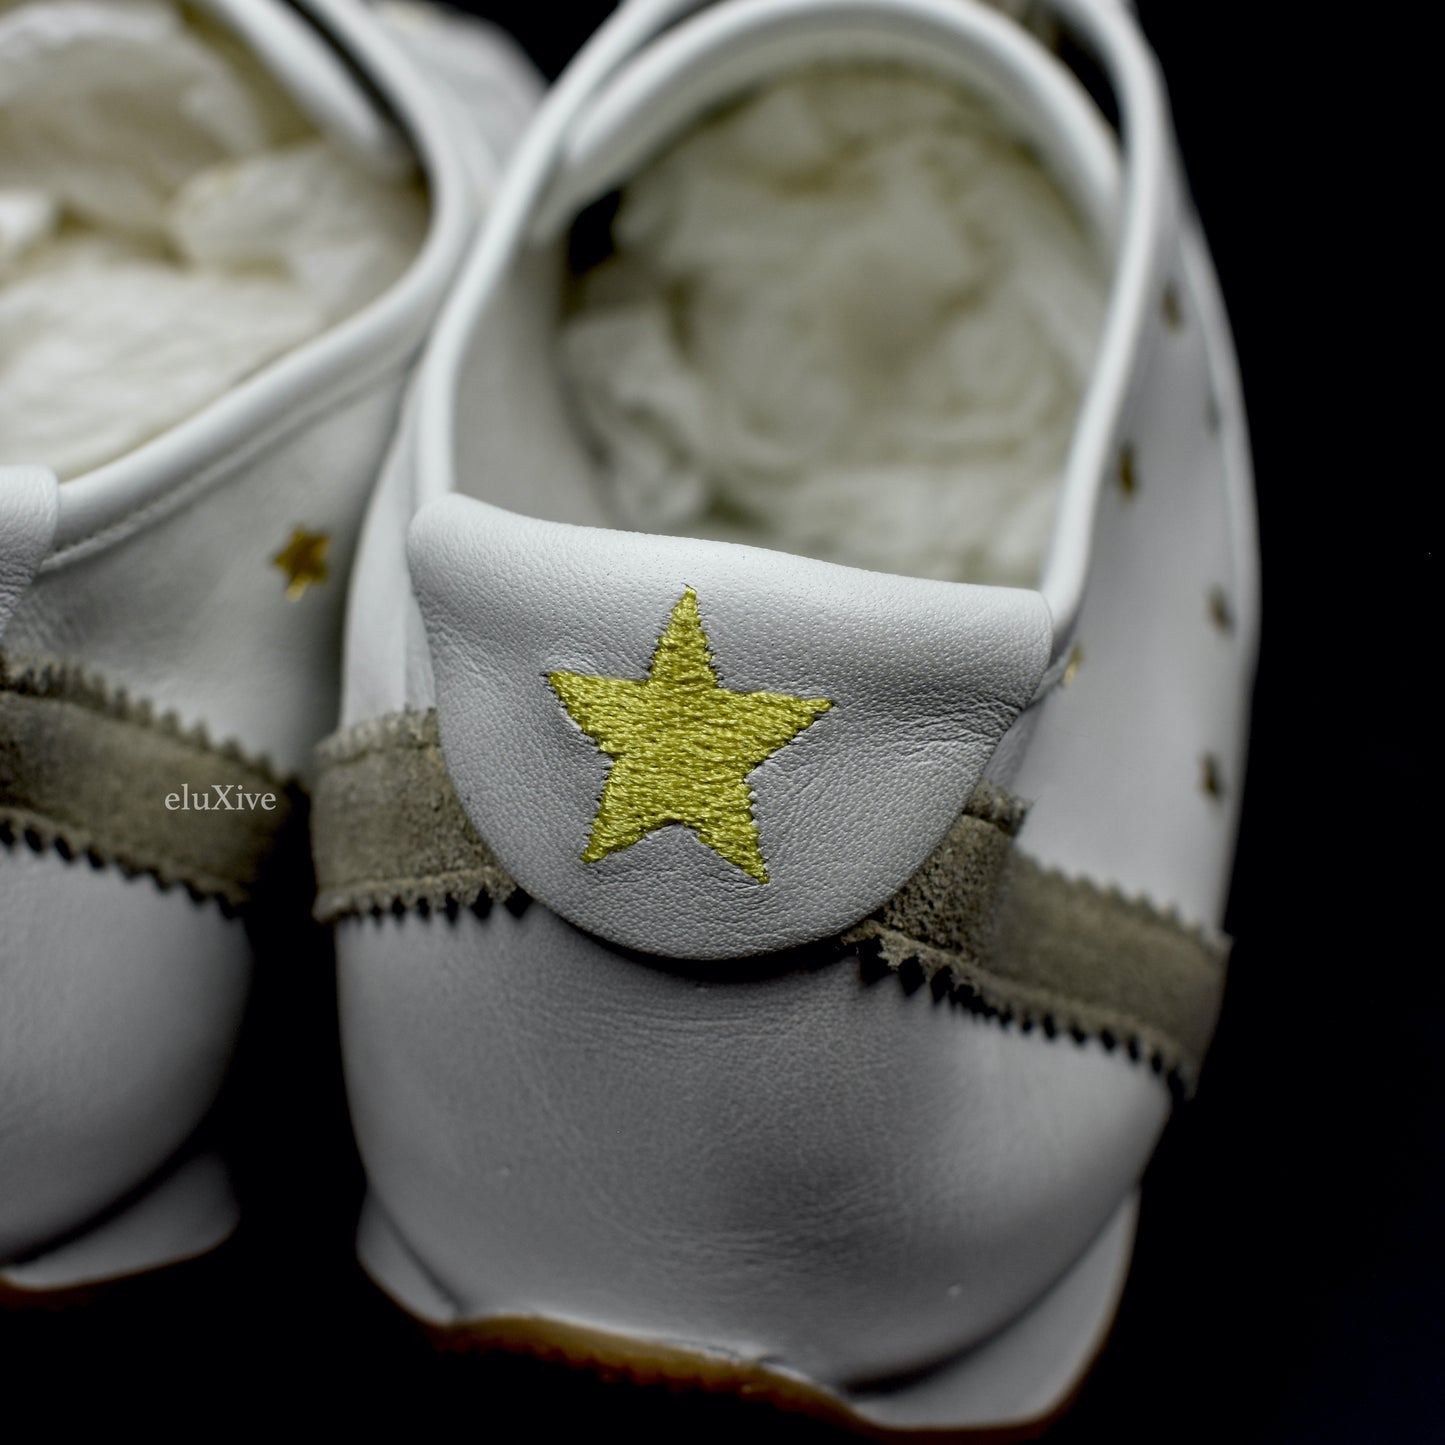 Saint Laurent - White Distressed Leather Jay Sneakers